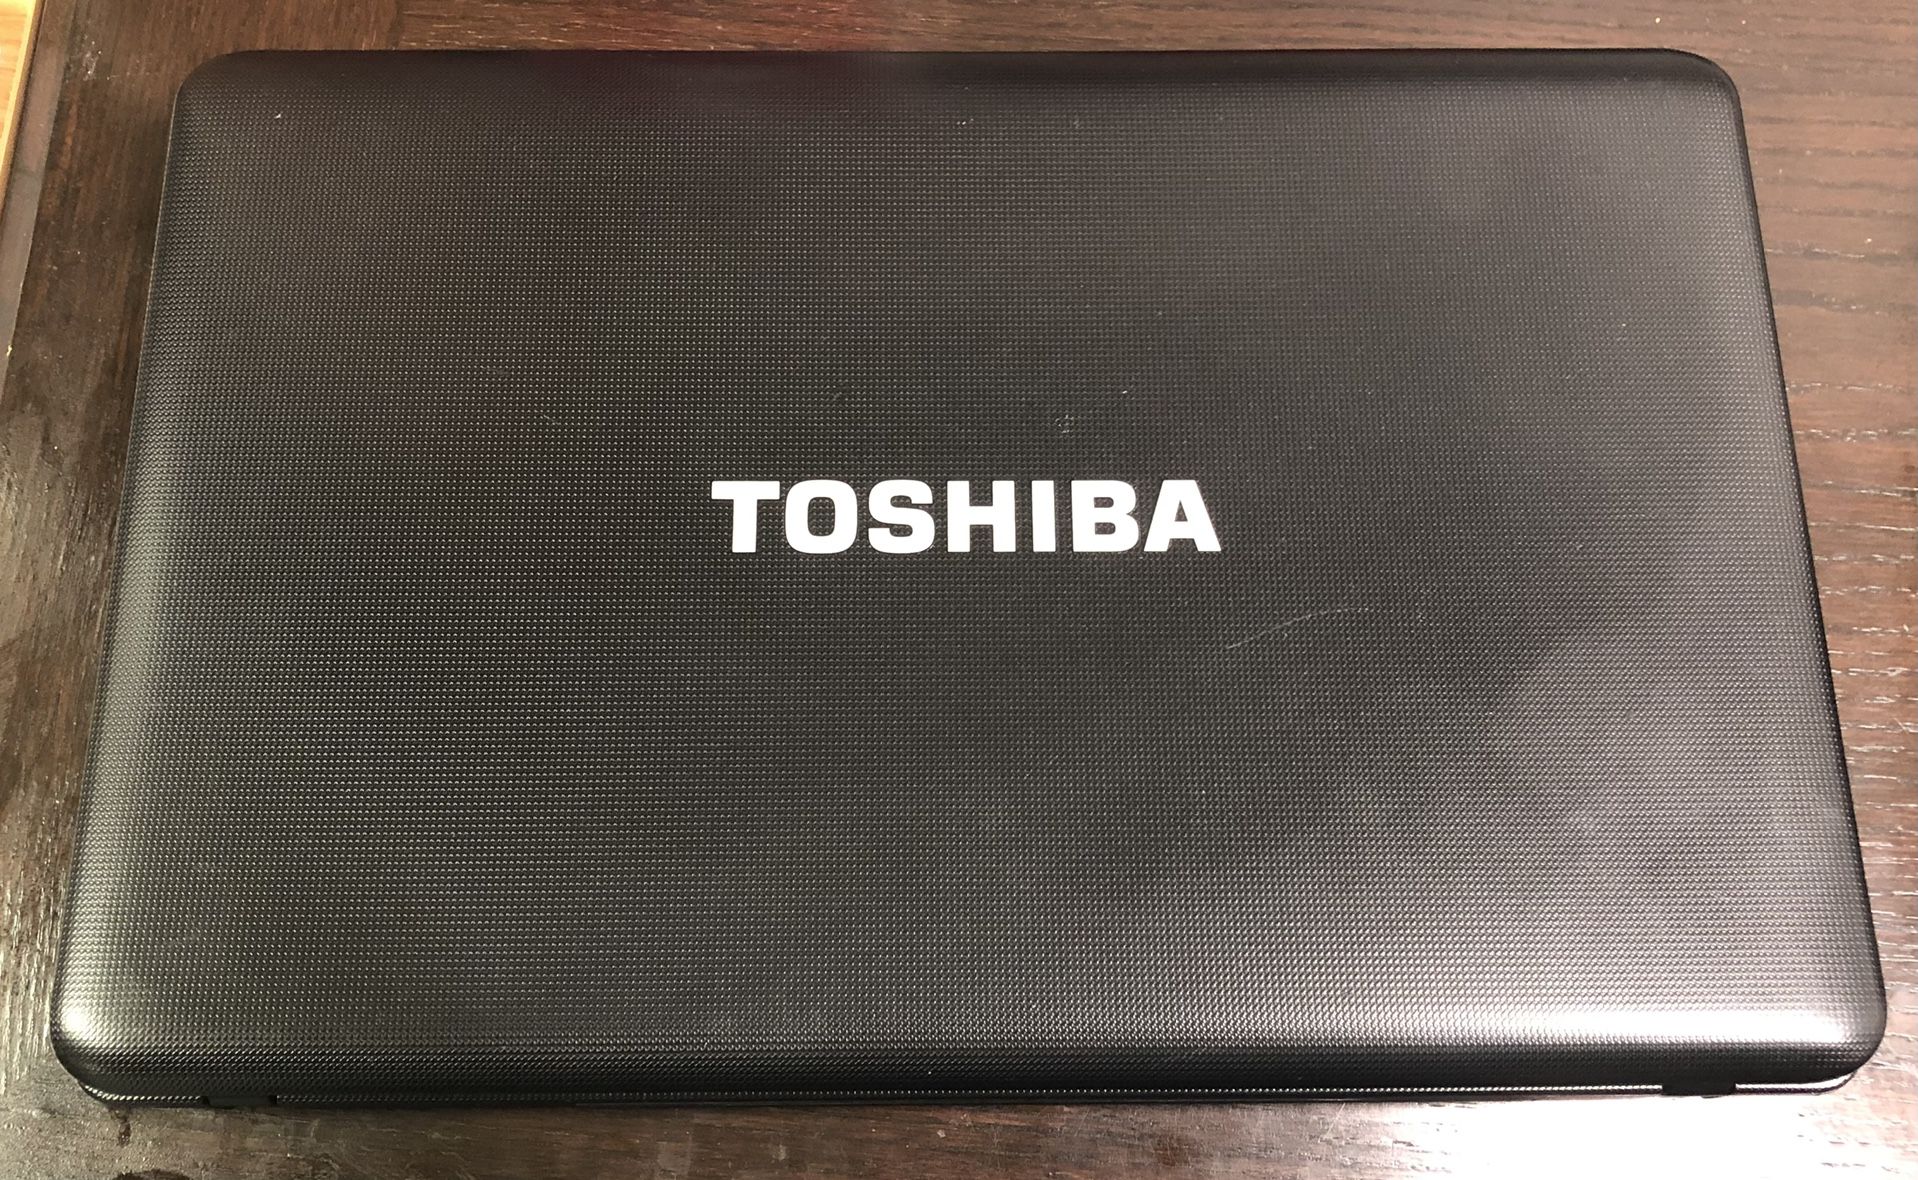 Toshiba Laptop Works Great Like New Comes W Charger